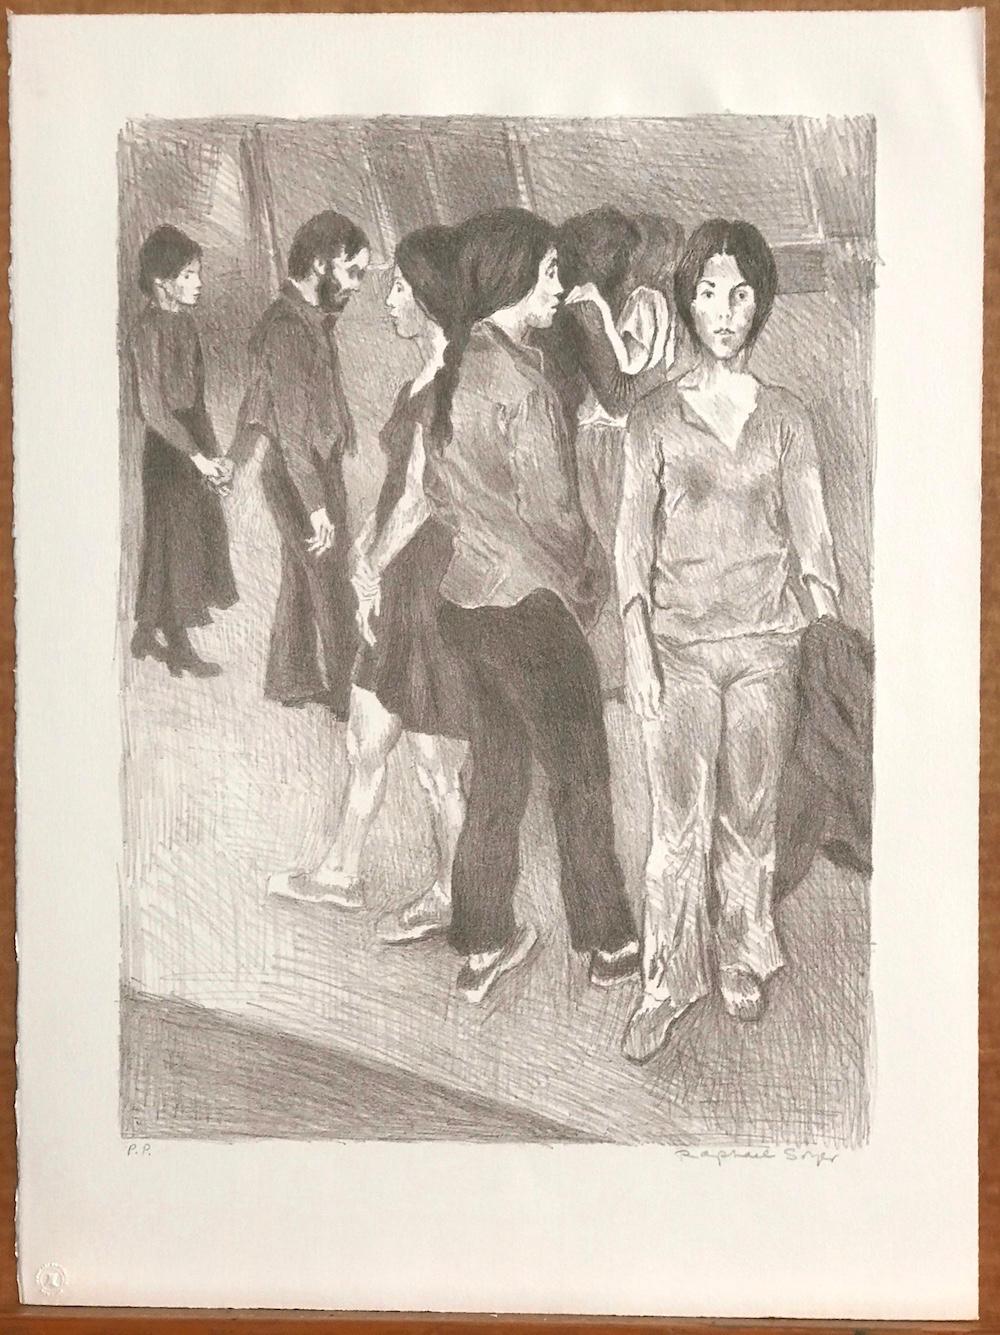 GATHERING Signed Stone Lithograph, NYC Group Portrait Drawing, Light Brown - Realist Print by Raphael Soyer